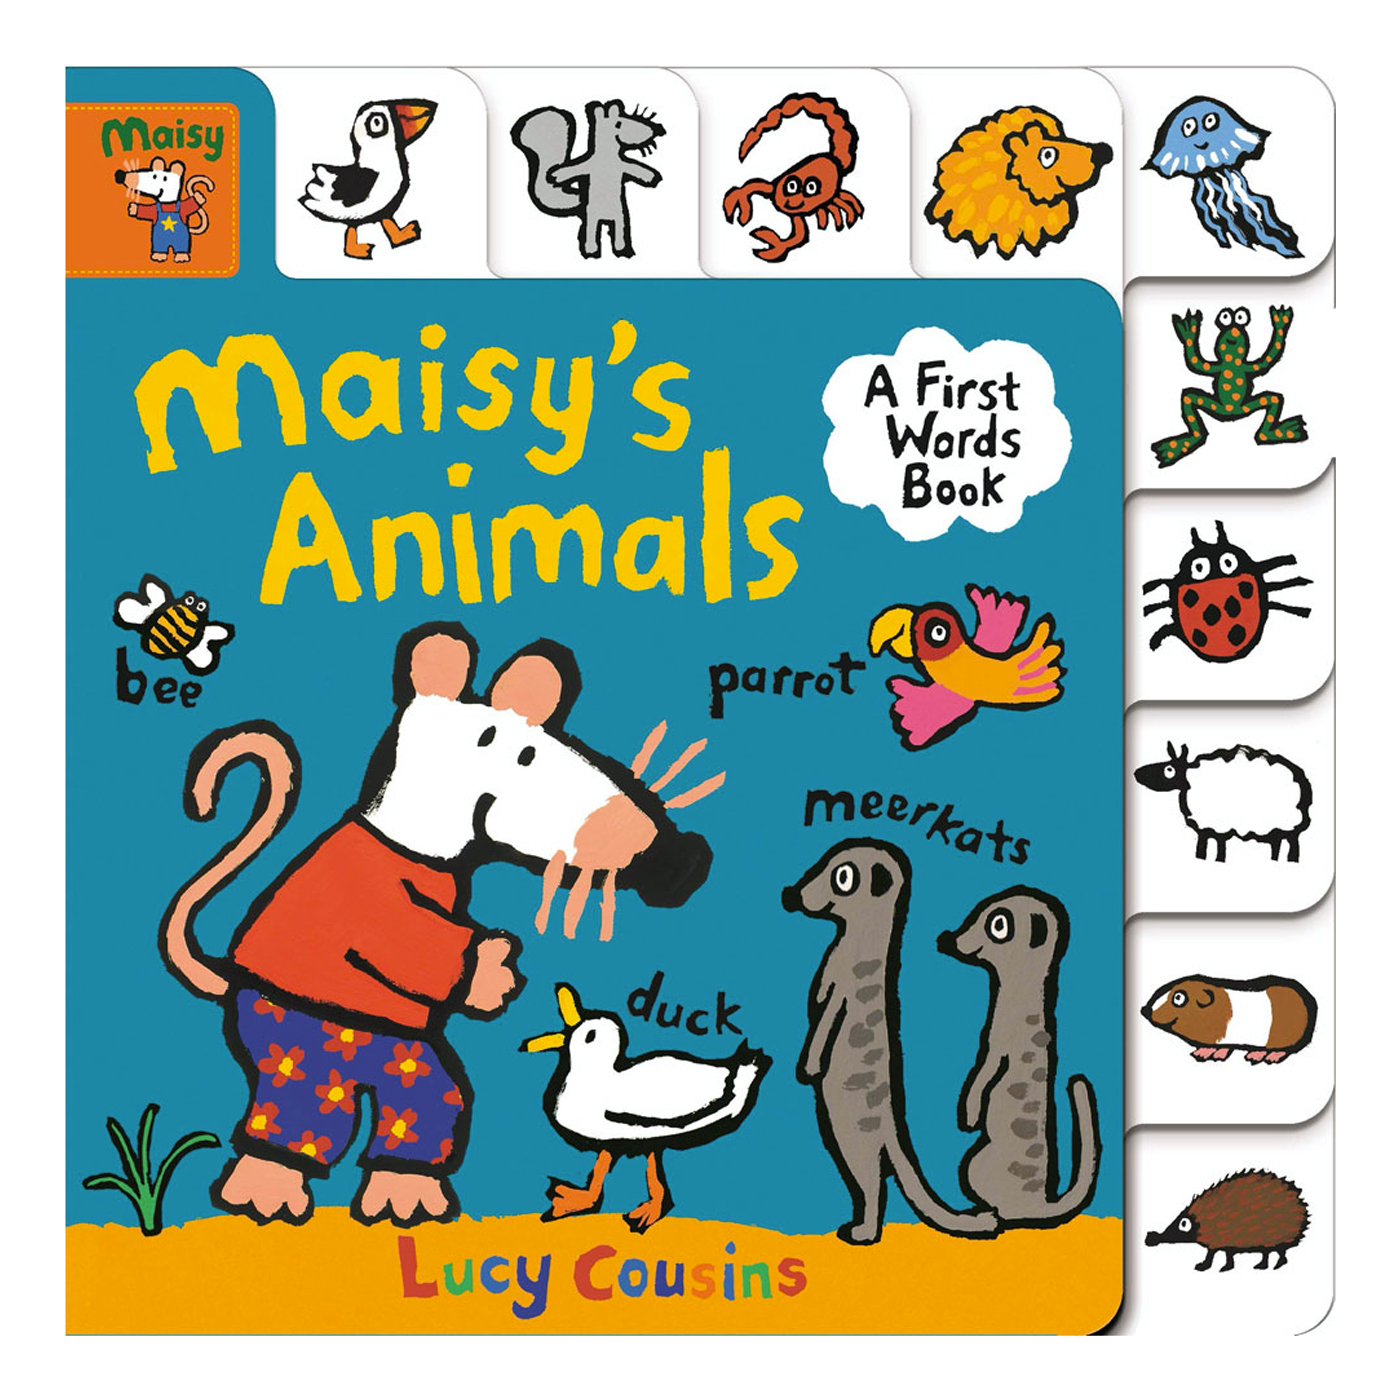  Maisy's Animals: First Words Book